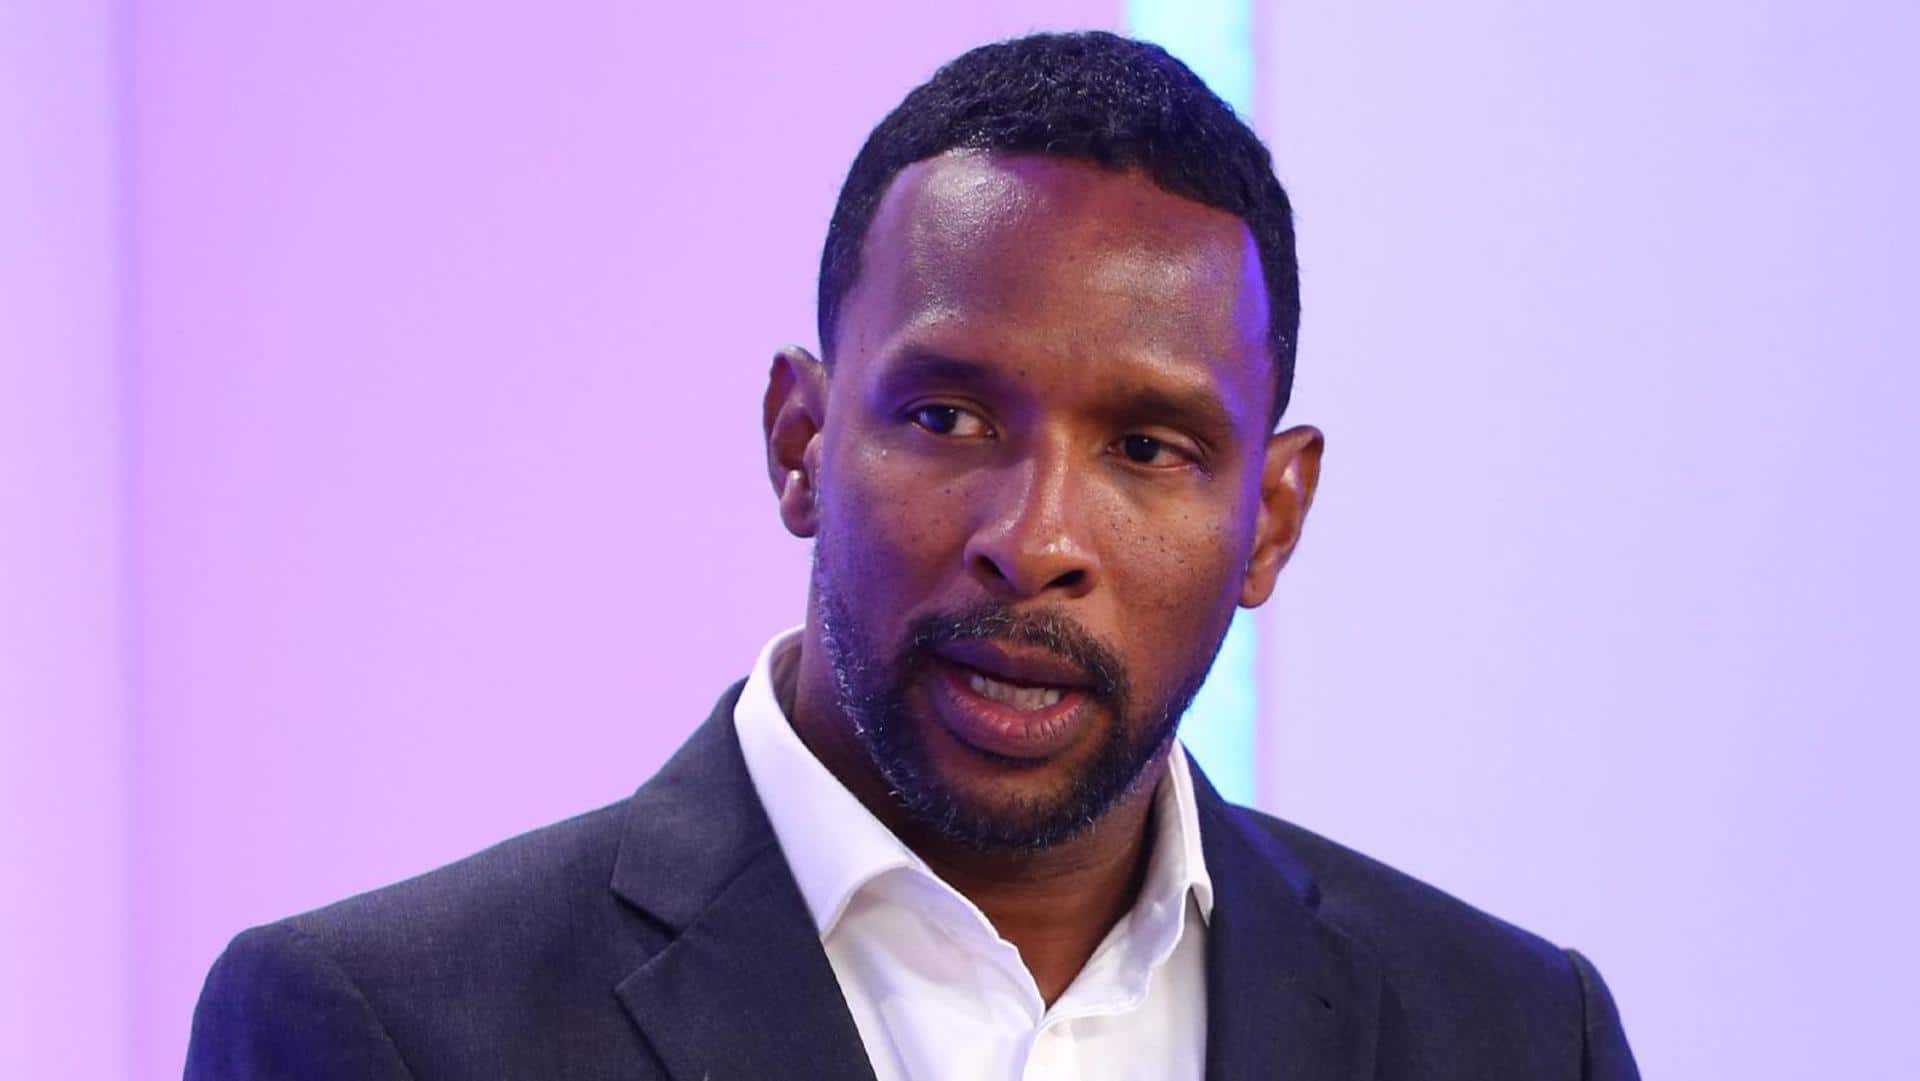 ESPN's Shaka Hislop gains consciousness after collapsing during live show